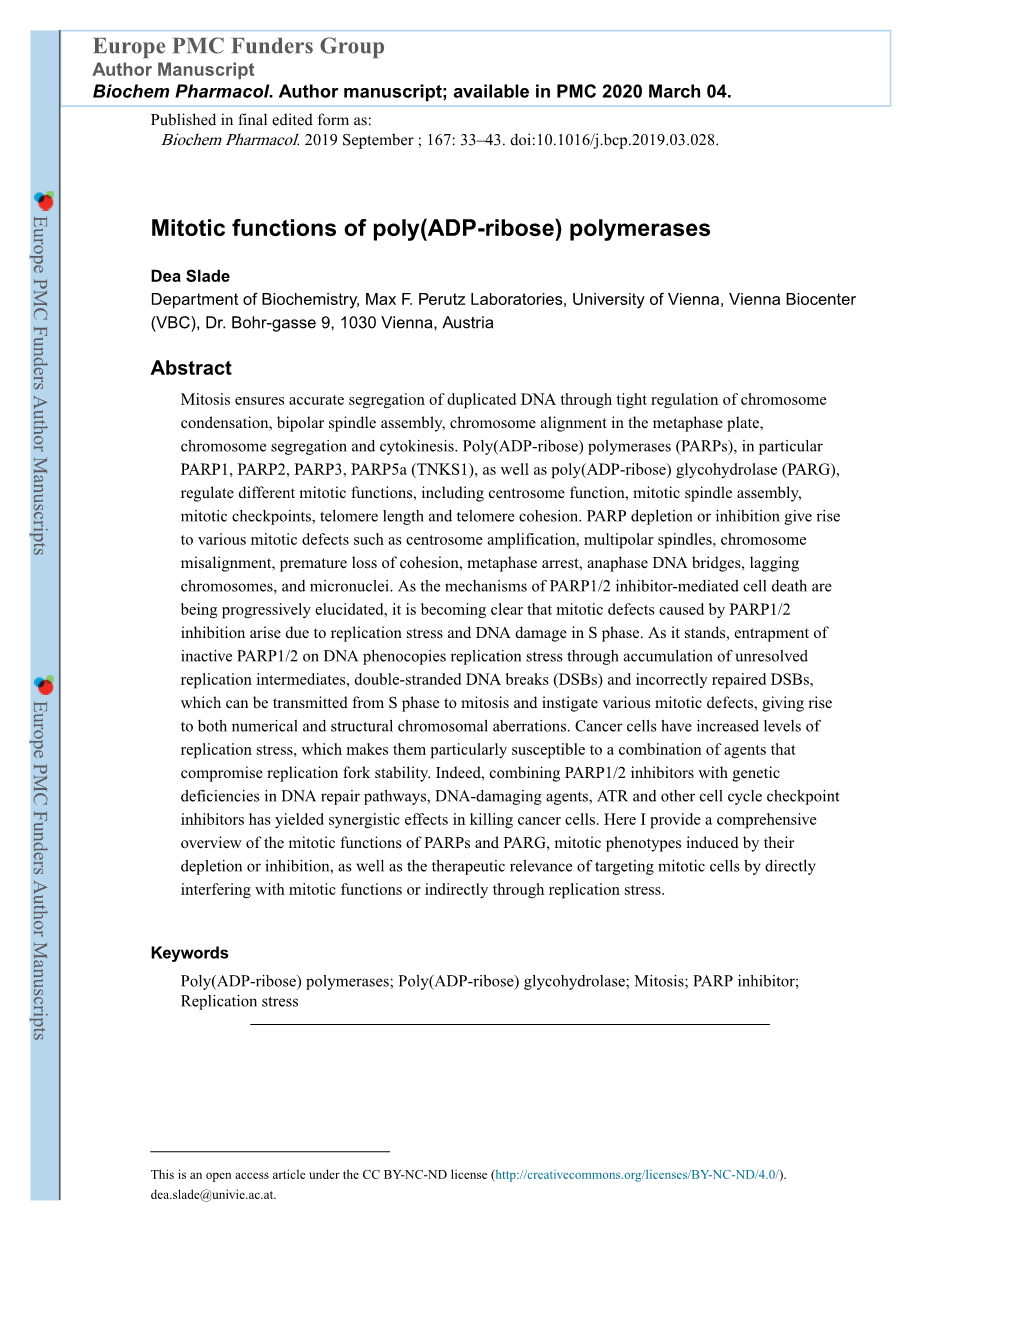 Mitotic Functions of Poly(ADP-Ribose) Polymerases